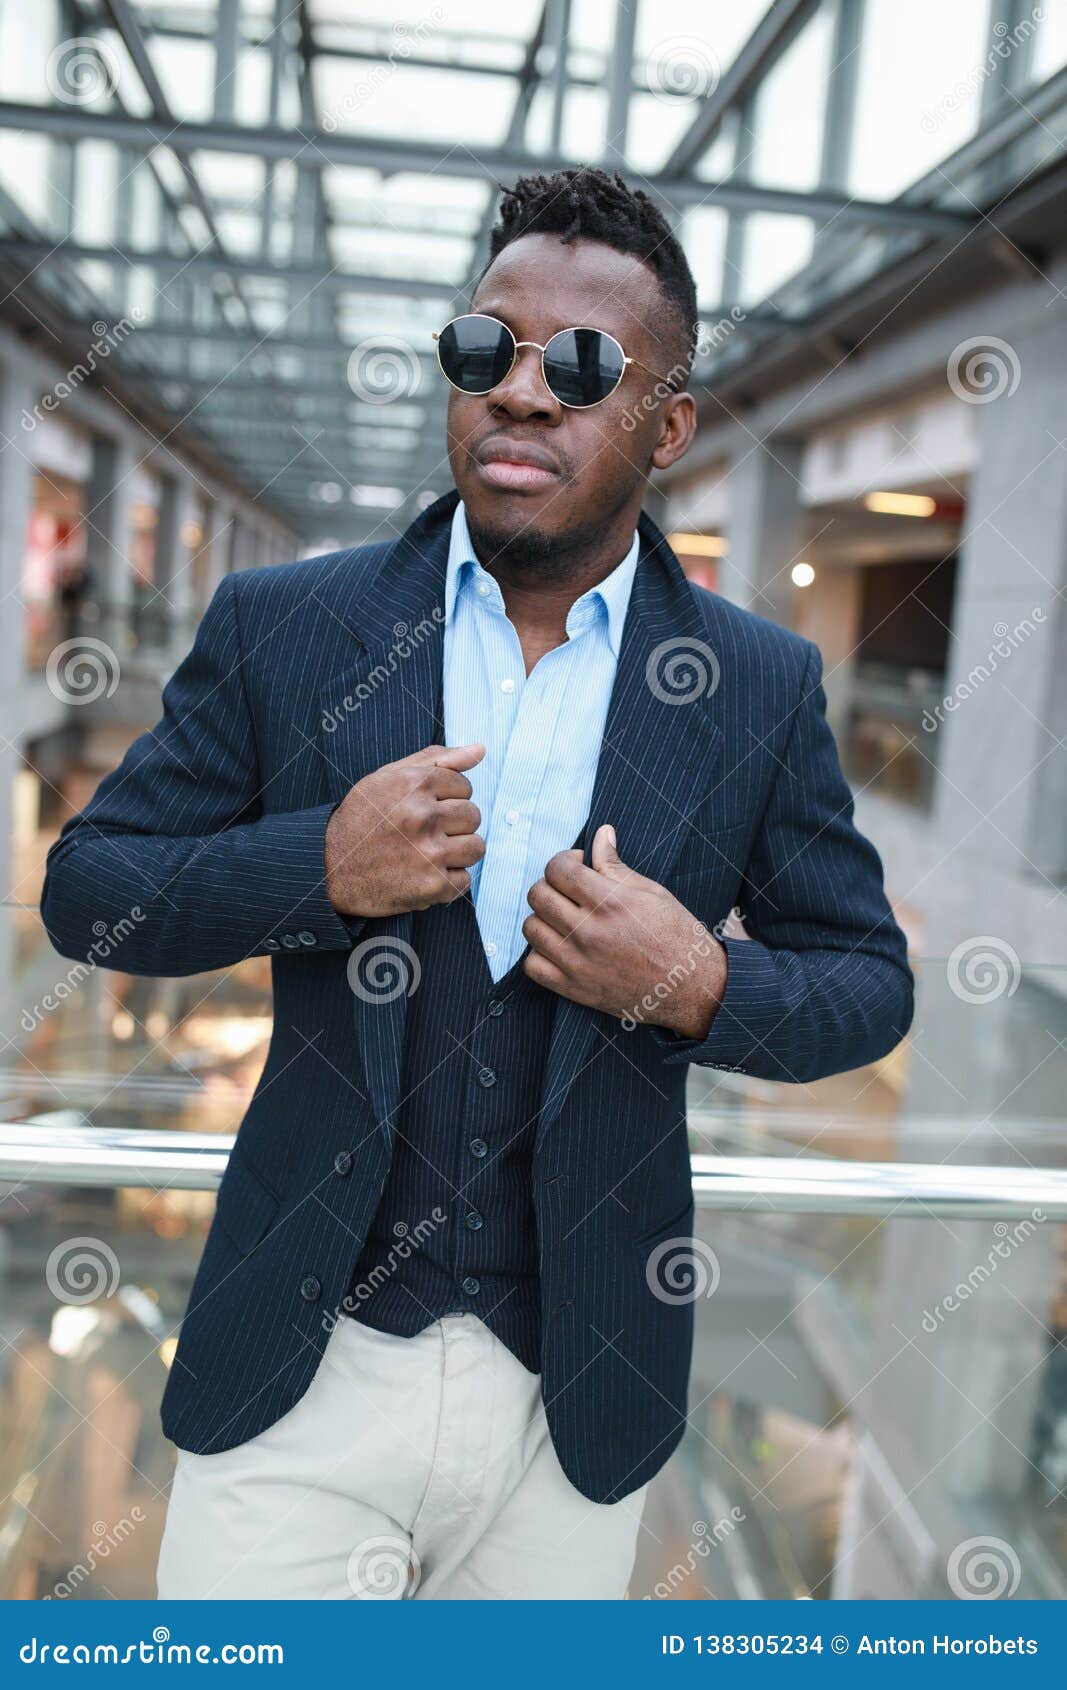 African fashion man model stock photo. Image of boutique - 138305234